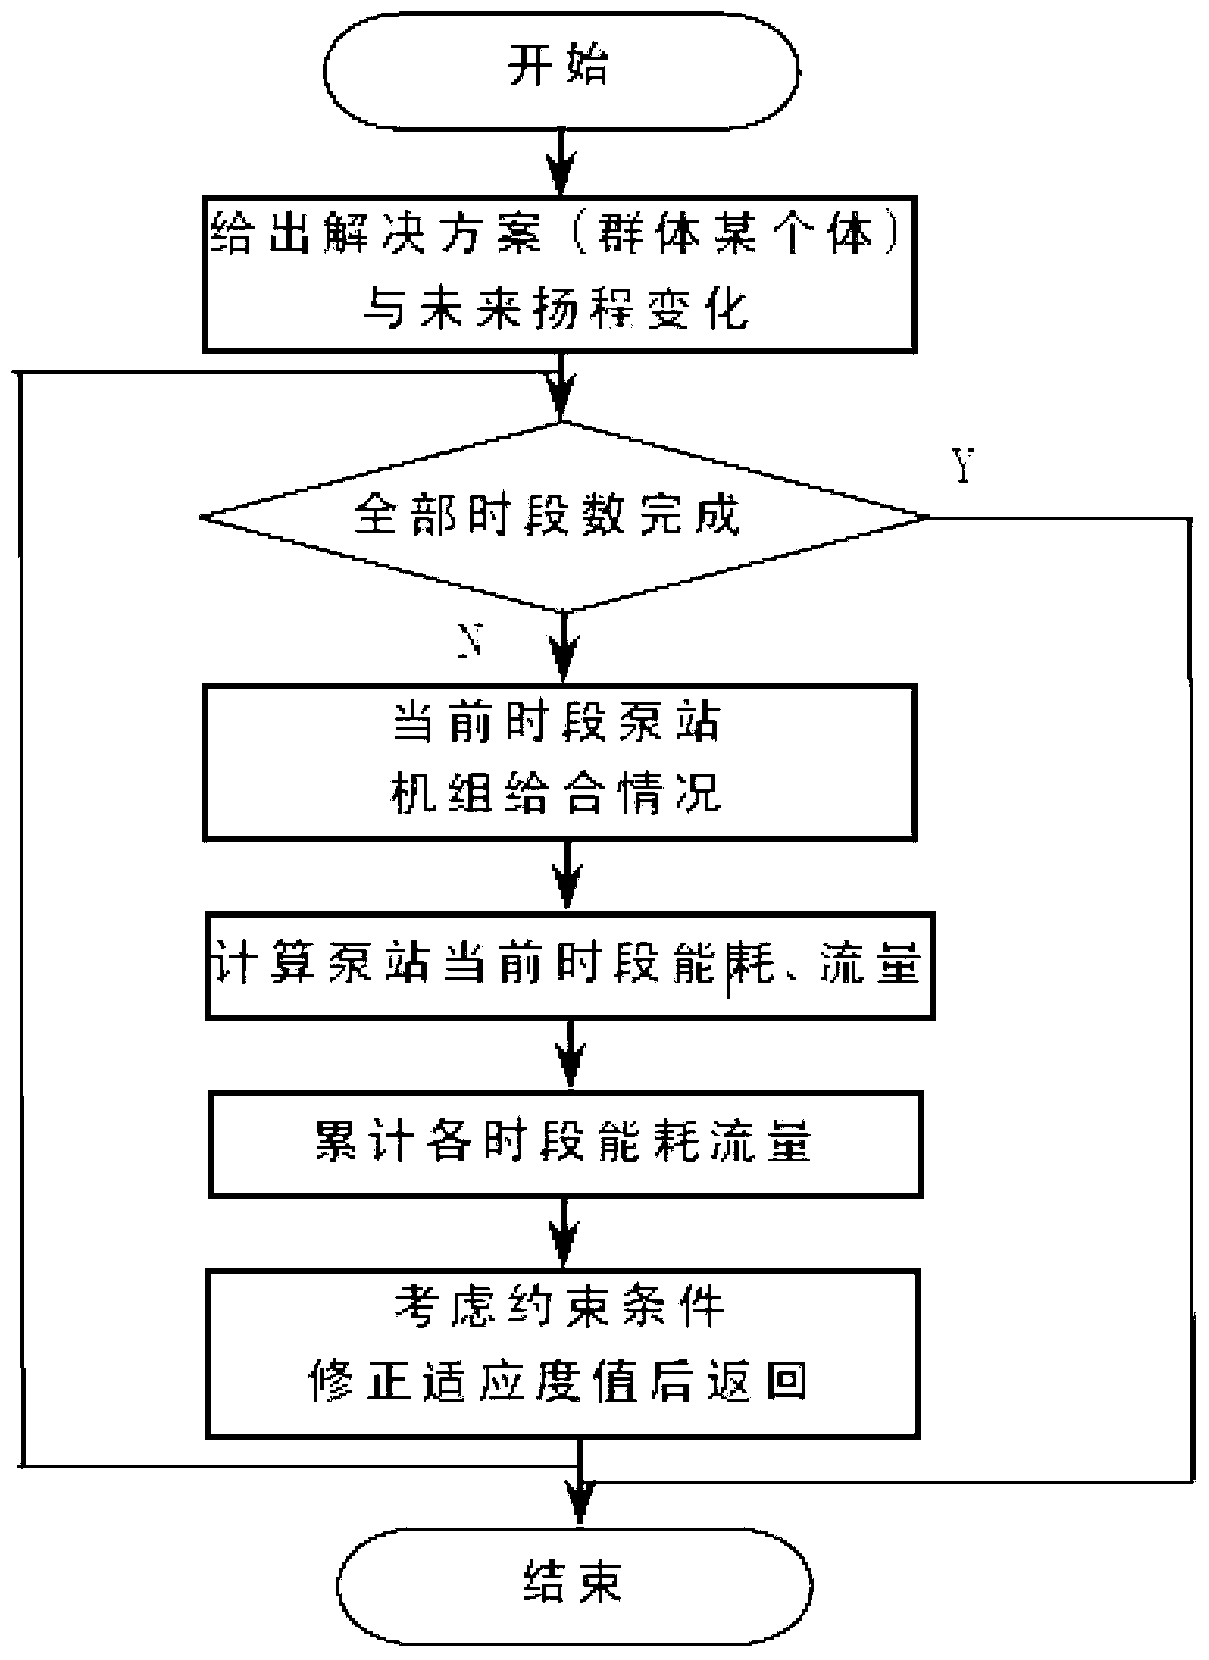 Optimal scheduling method for single-stage pump station